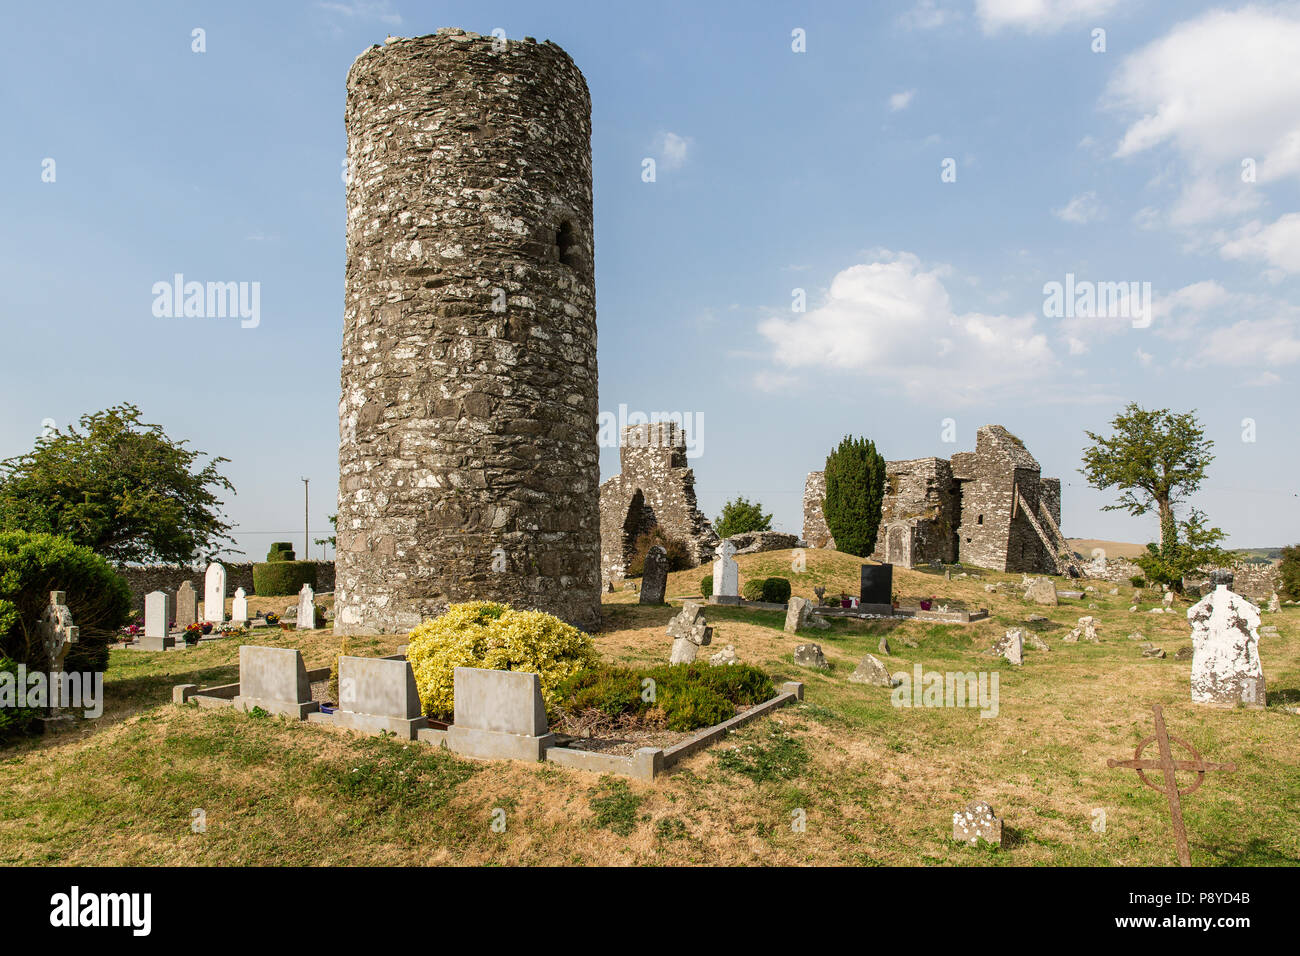 Resting place of Arthur Guinness located in the grounds of the Old Monastic site in Oughterard in County Kildare Ireland. Stock Photo